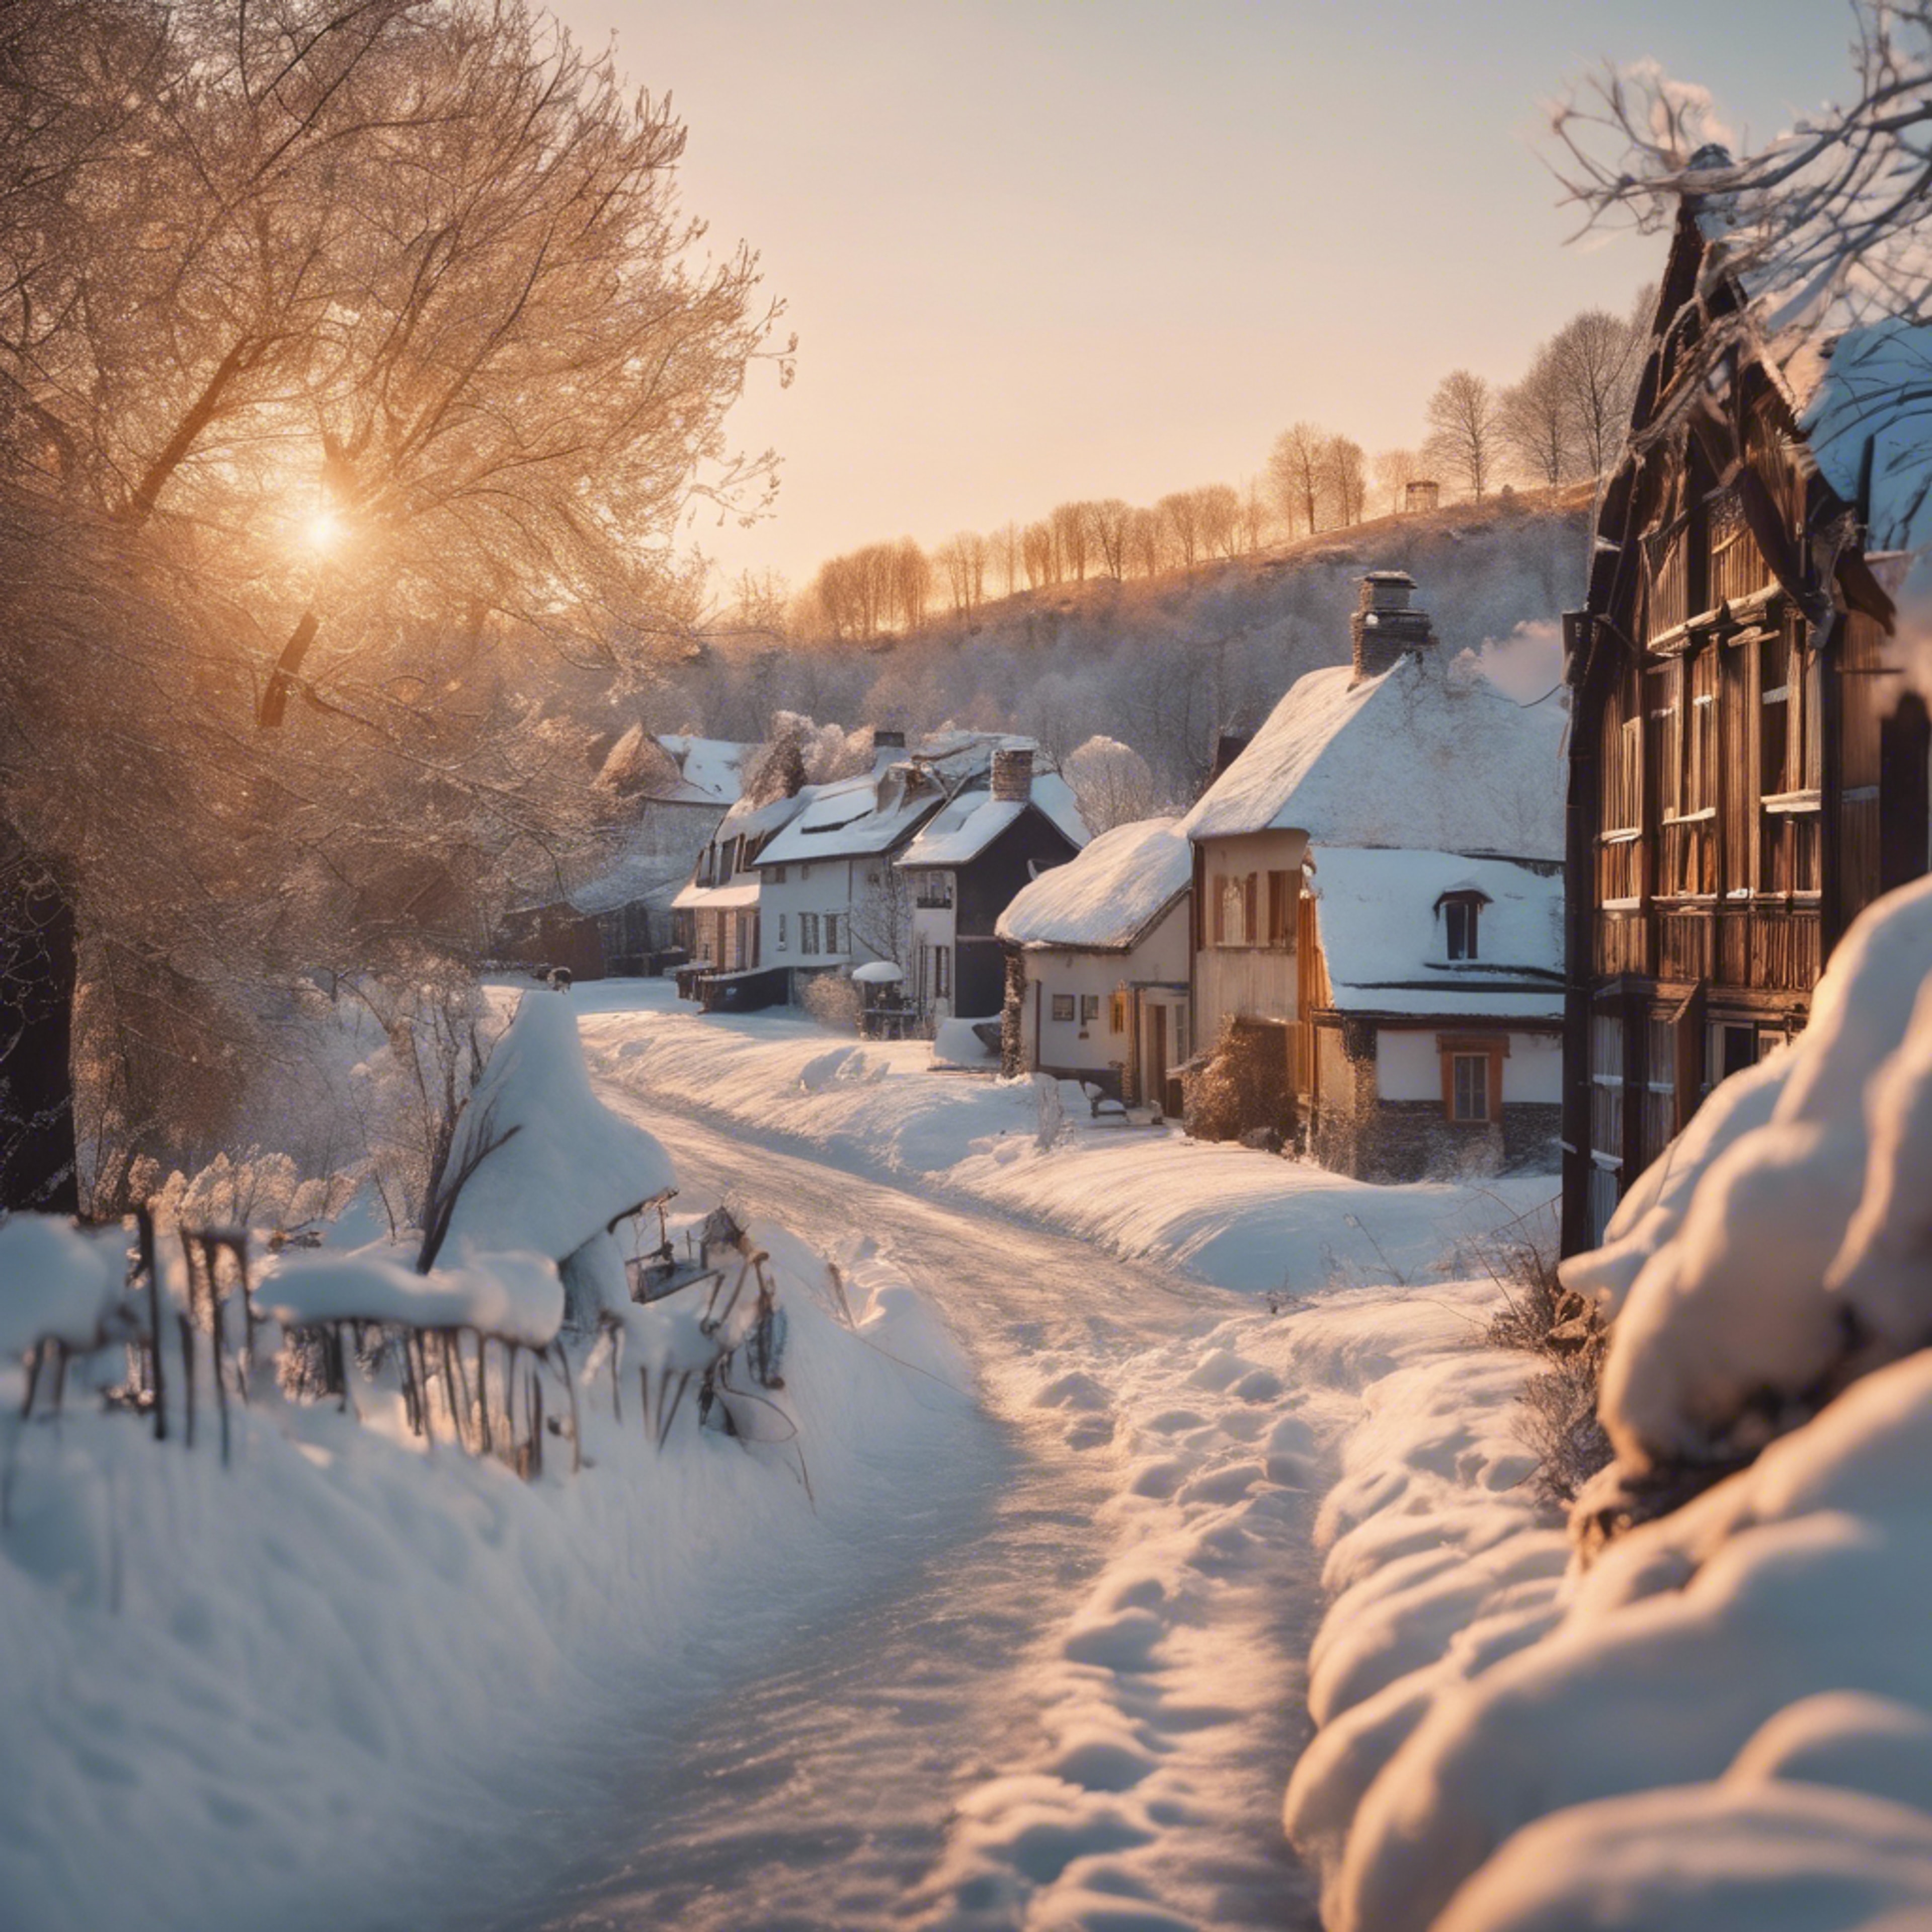 A snow-covered village scene bathed in the soft, golden glow of the setting sun.壁紙[95d4db54dffb469bbeda]